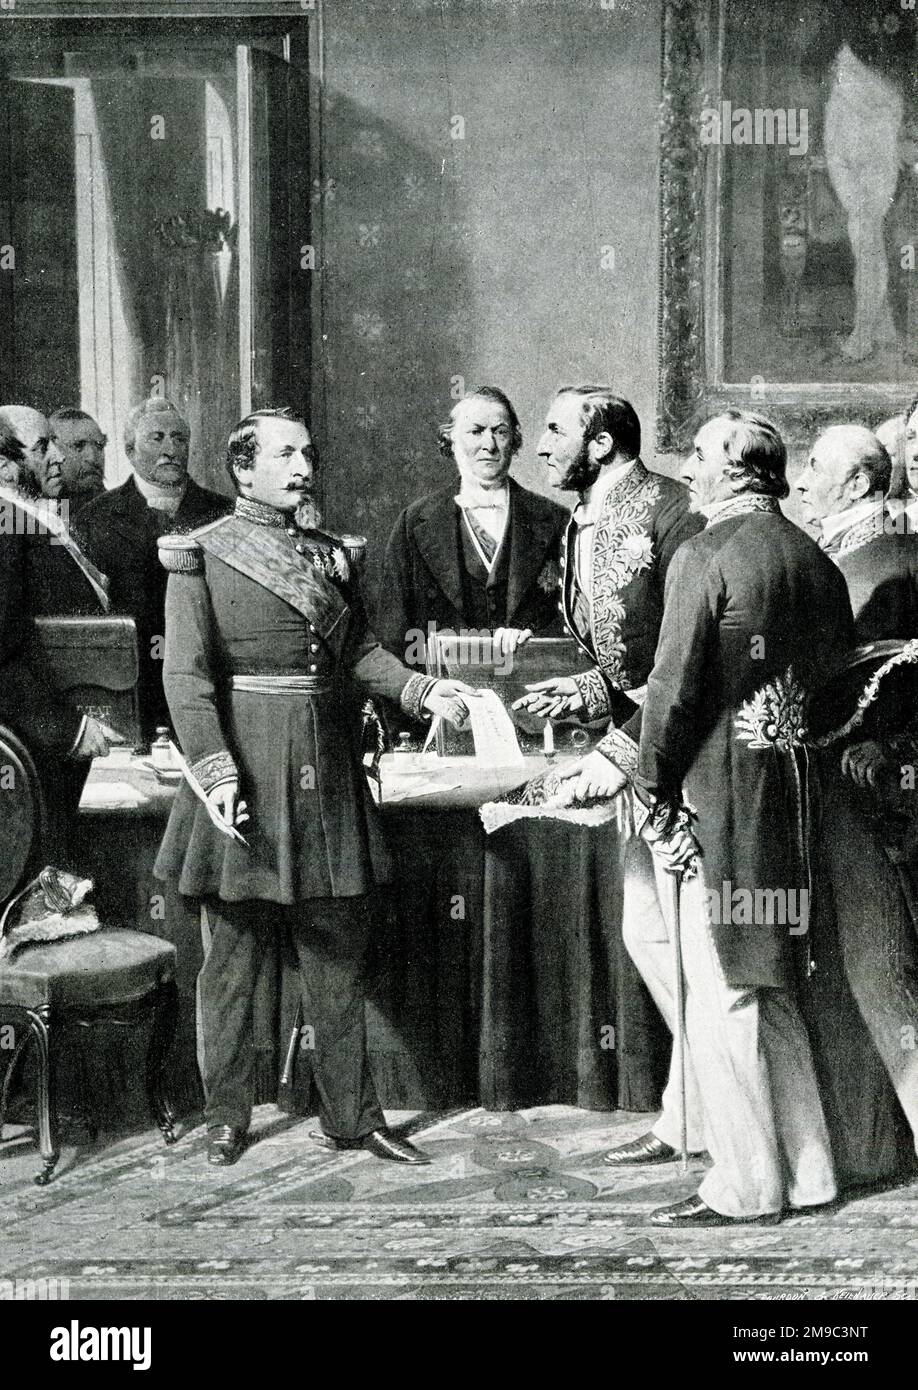 Napoleon III handing over the decree of annexation of the suburbs of Paris to Baron Haussmann, for urban development (16 February 1859). Others present are J-B Dumas, chemist and president of the municipal council, General Fleury and General Rolin.   (1 of 2) Stock Photo